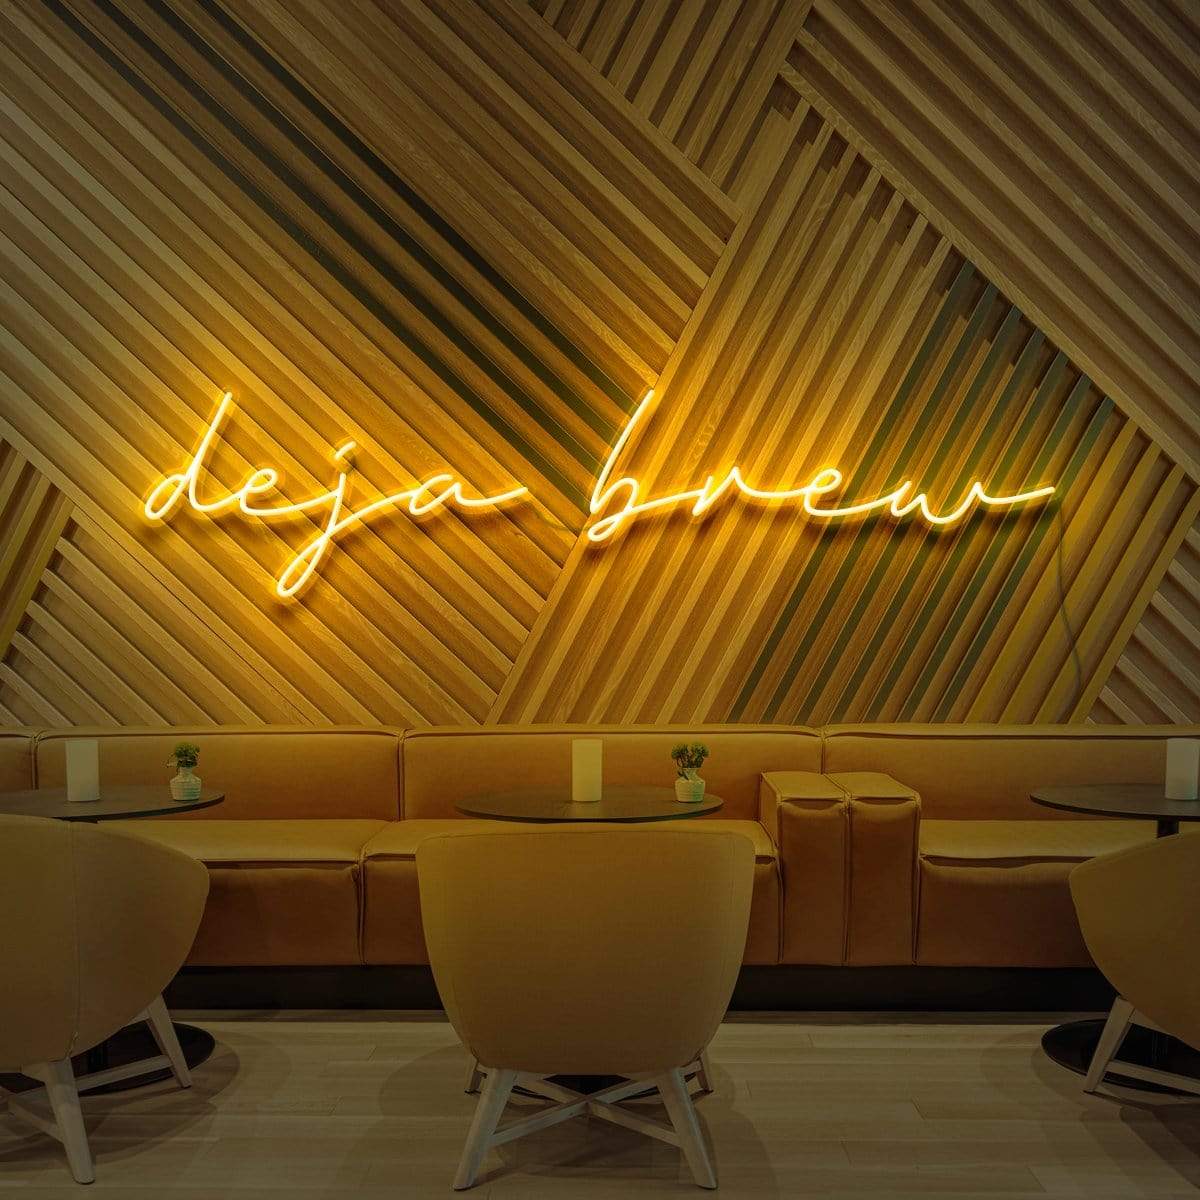 "Deja Brew" Neon Sign for Cafés 90cm (3ft) / Yellow / LED Neon by Neon Icons